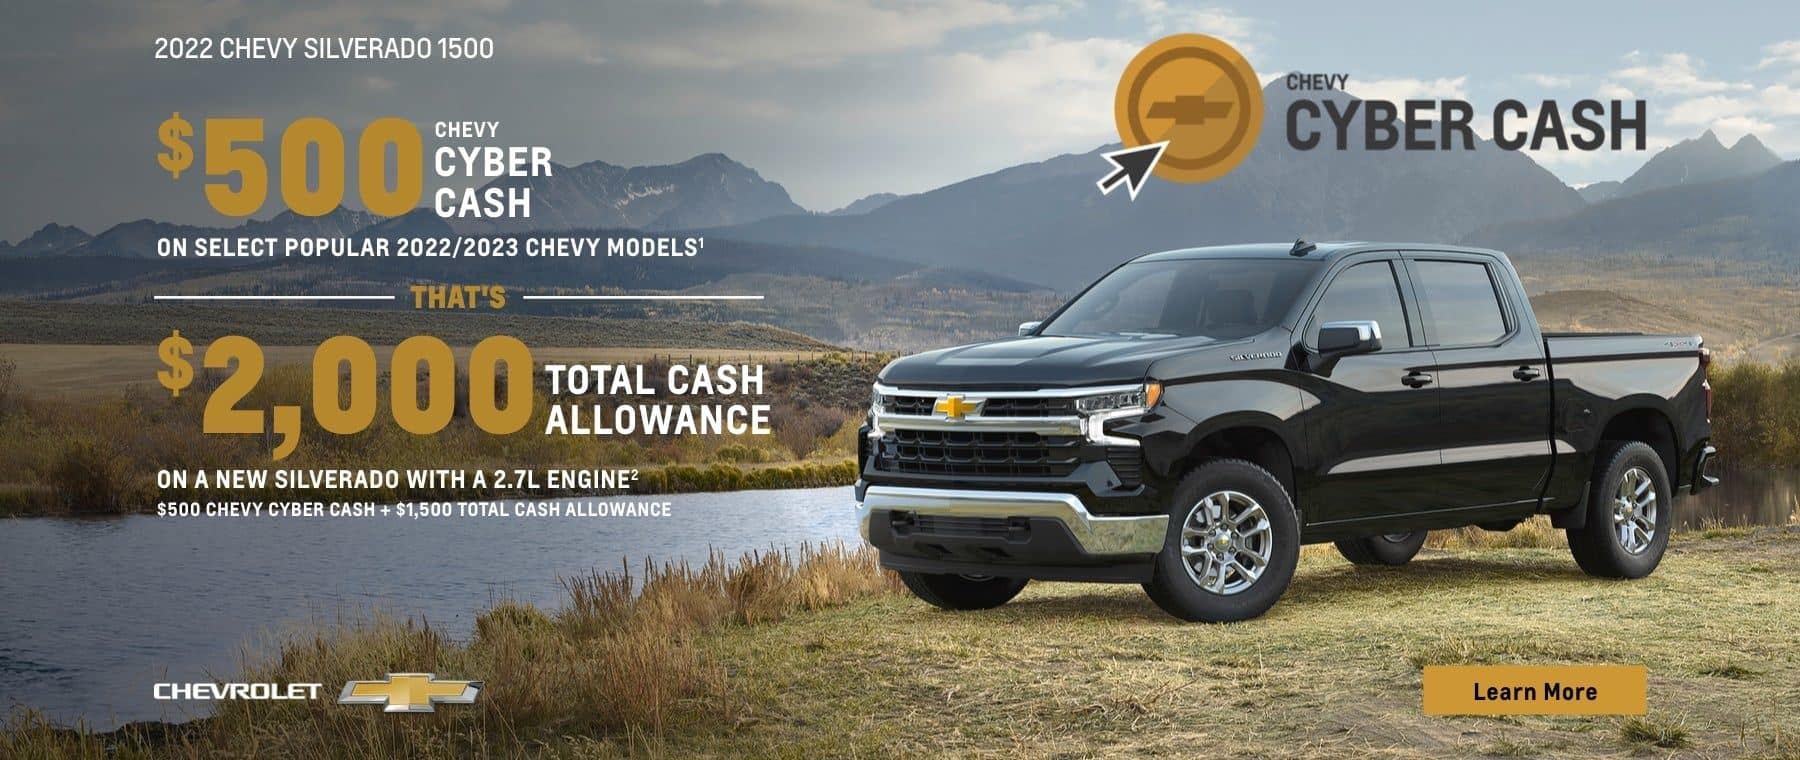 $500 Chevy Cyber Cash on select popular 2022/2023 Chevy models. That's $2,000 total cash allowance on a new Silverado with a 2.7L engine. $500 Chevy Cyber Cash + $1,500 Total Cash Allowance